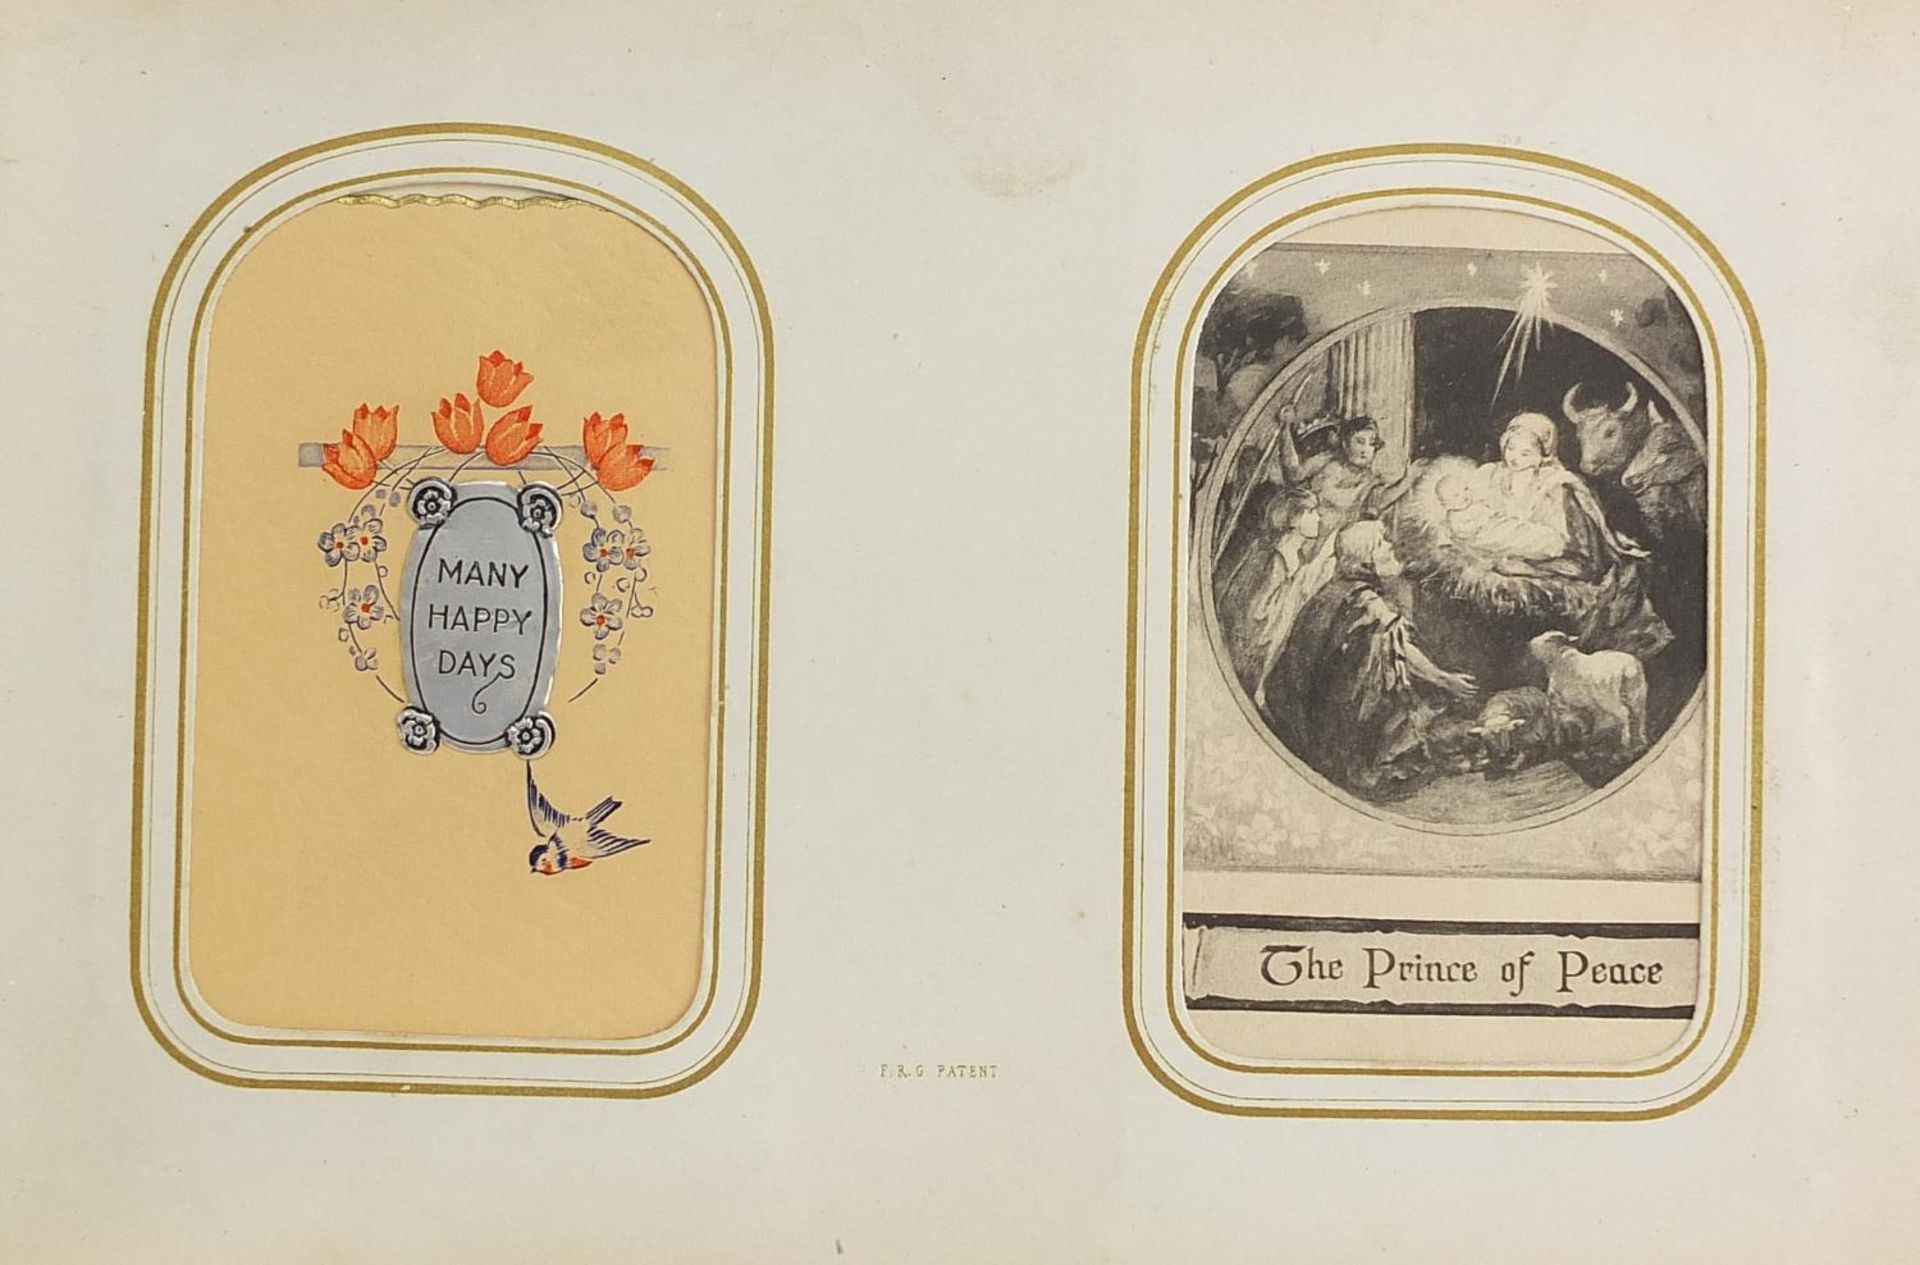 Collection of black and white cabinet cards and greetings cards arranged in a tooled leather album - Image 4 of 6